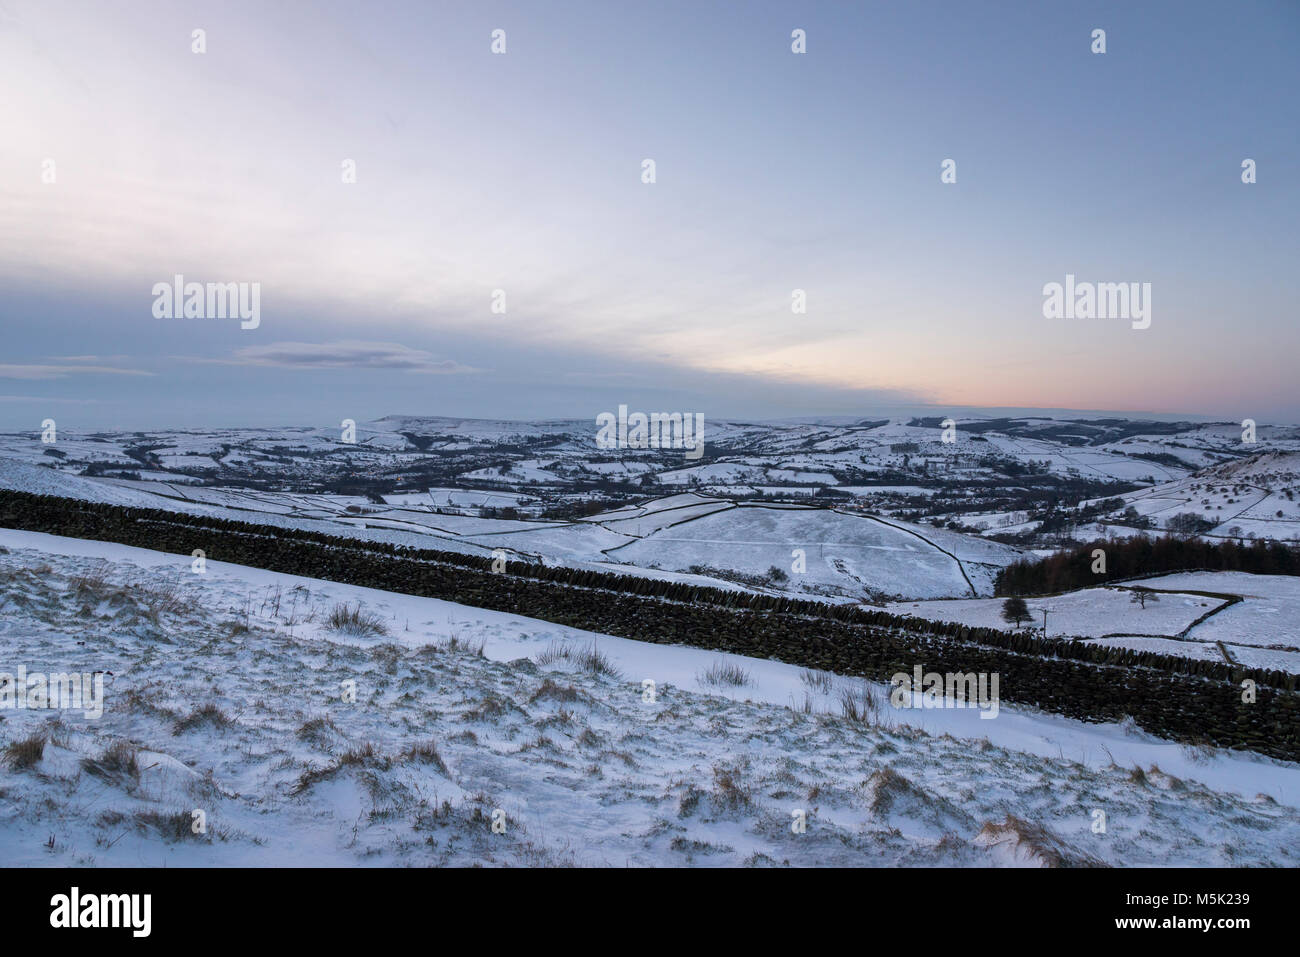 Snowy winter morning in the hills of the Peak District. View to Chapel-en-le-frith, Derbyshire, England. Stock Photo